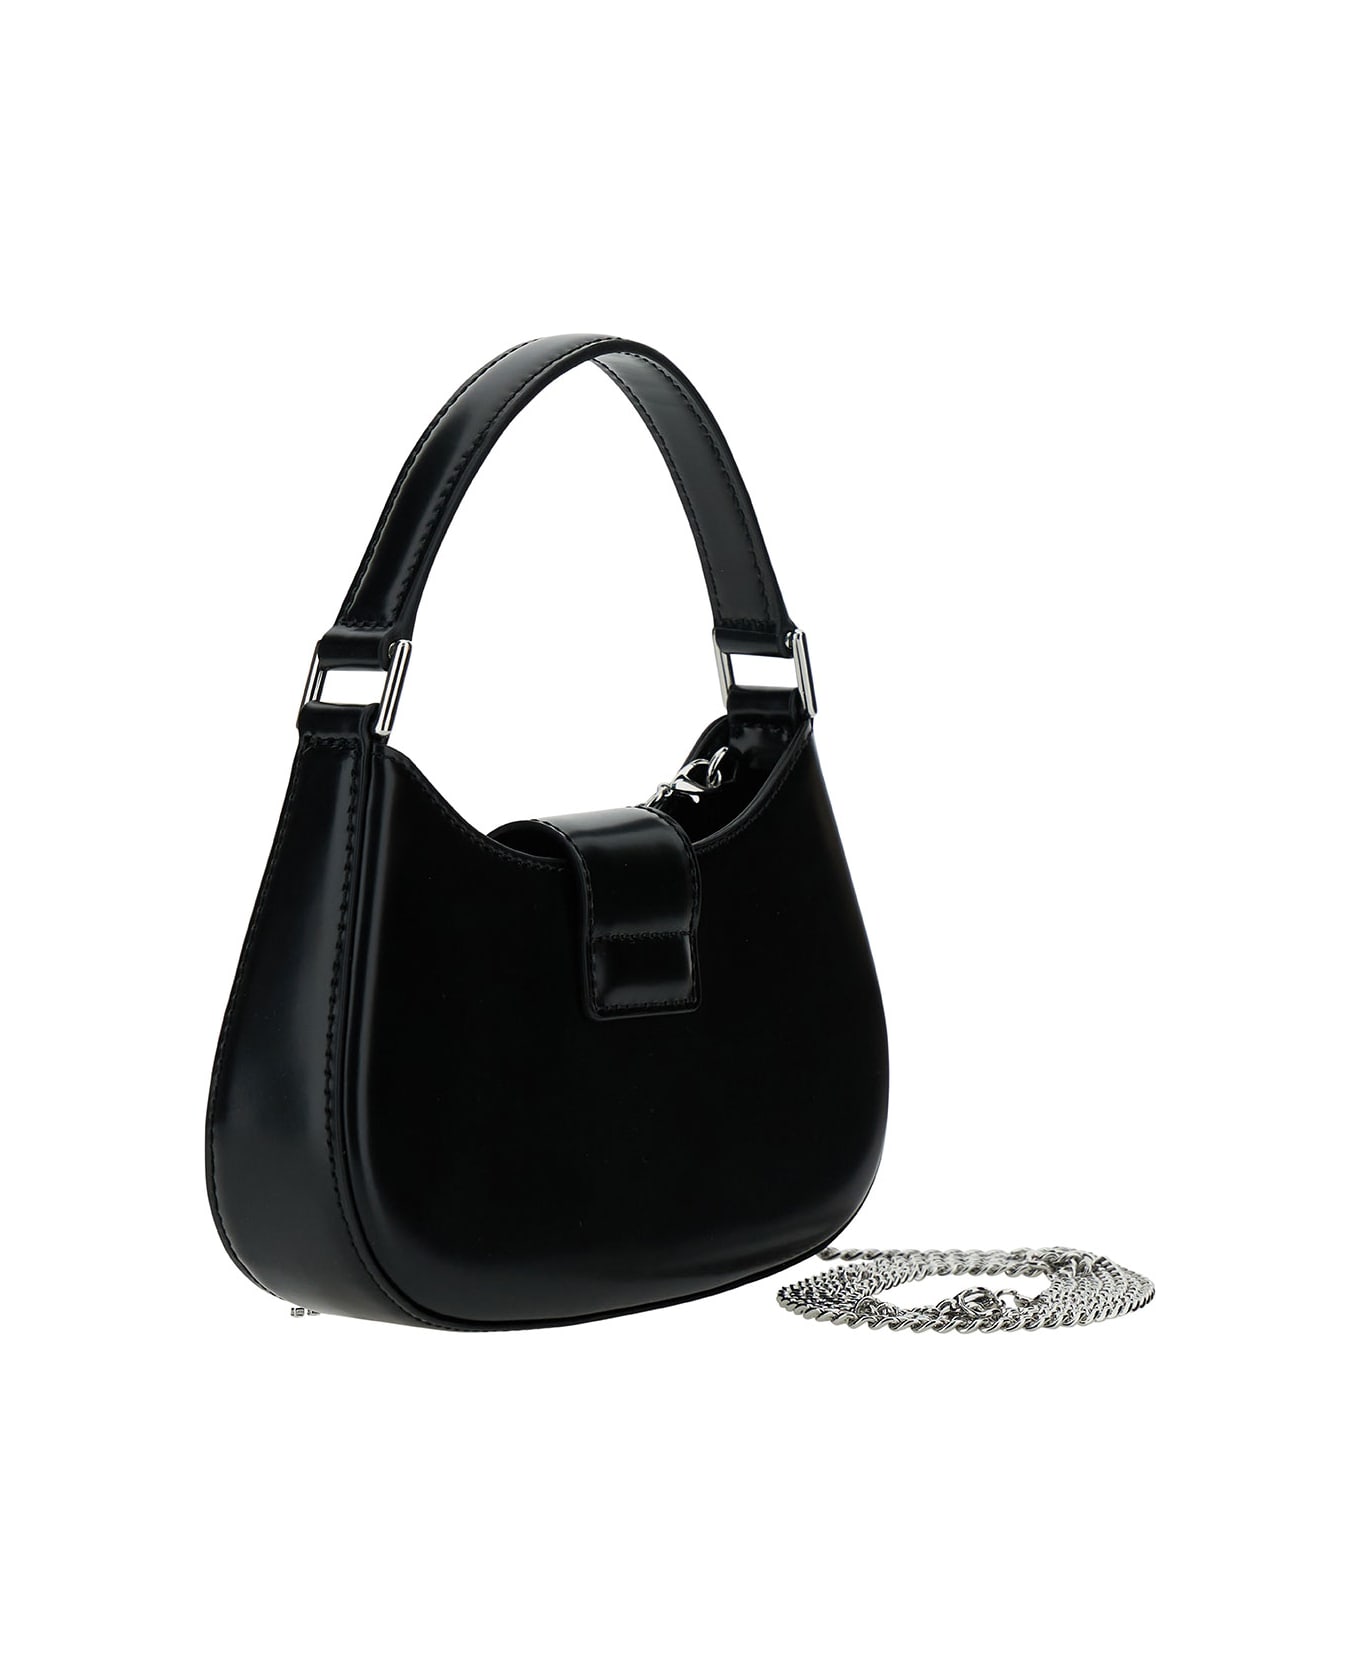 self-portrait Black Hobo Bag With Swarowski Bow Detail In Glossy Leather Woman - Black トートバッグ